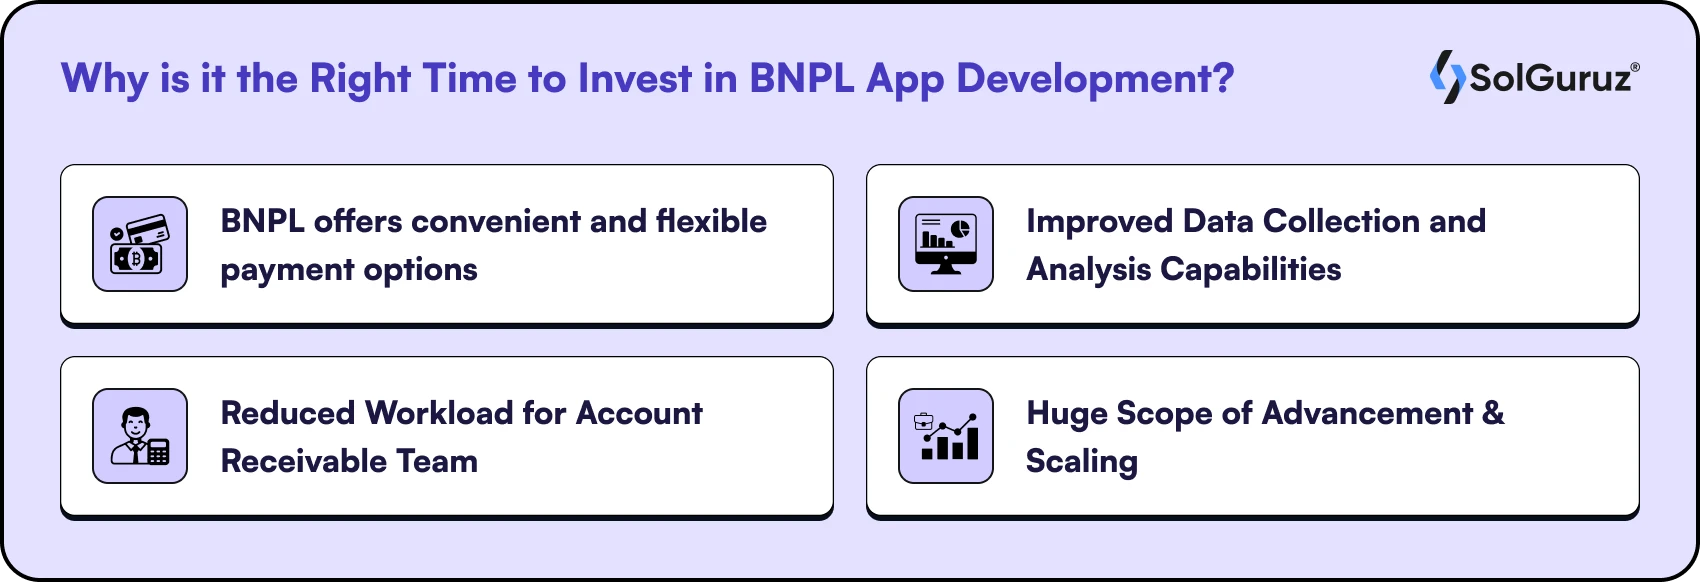 Why is it the Right Time to Invest in BNPL App Development